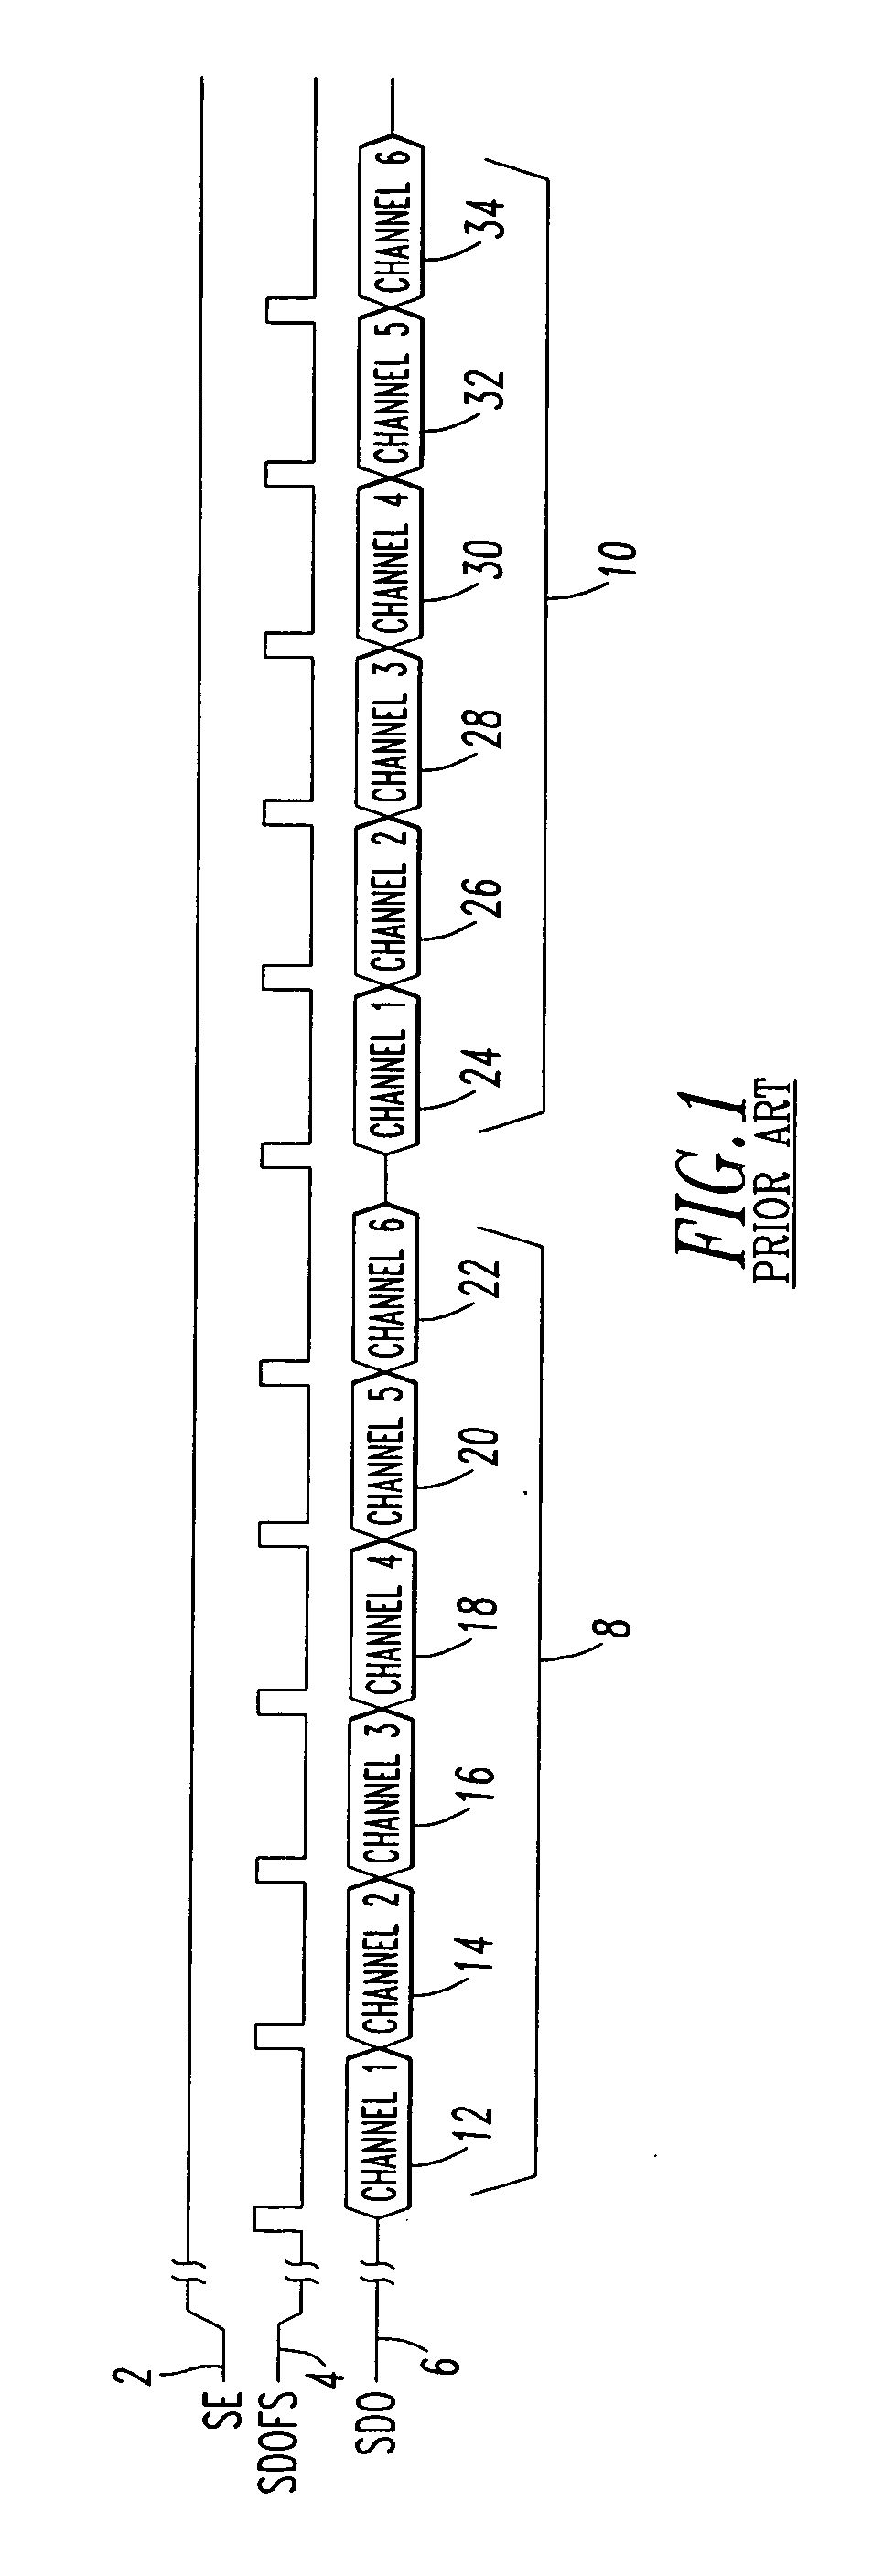 Plural channel analog-to-digital converter, method and meter employing an input channel with a predetermined direct current bias